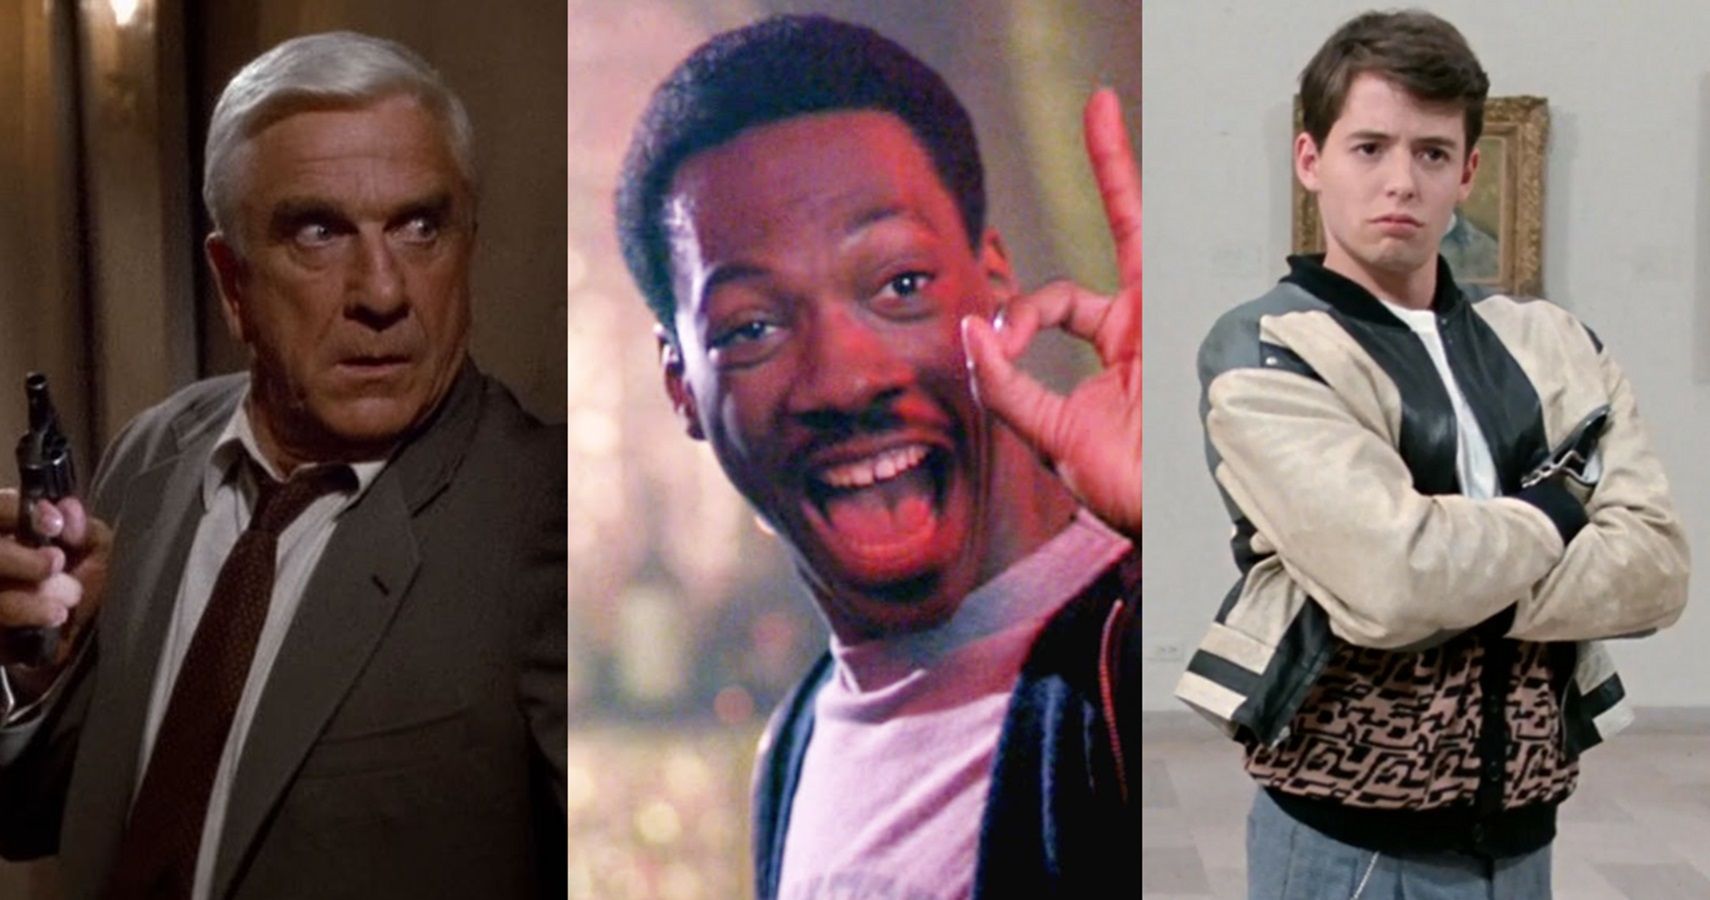 The 10 Best Comedy Movie Performances From The 80s